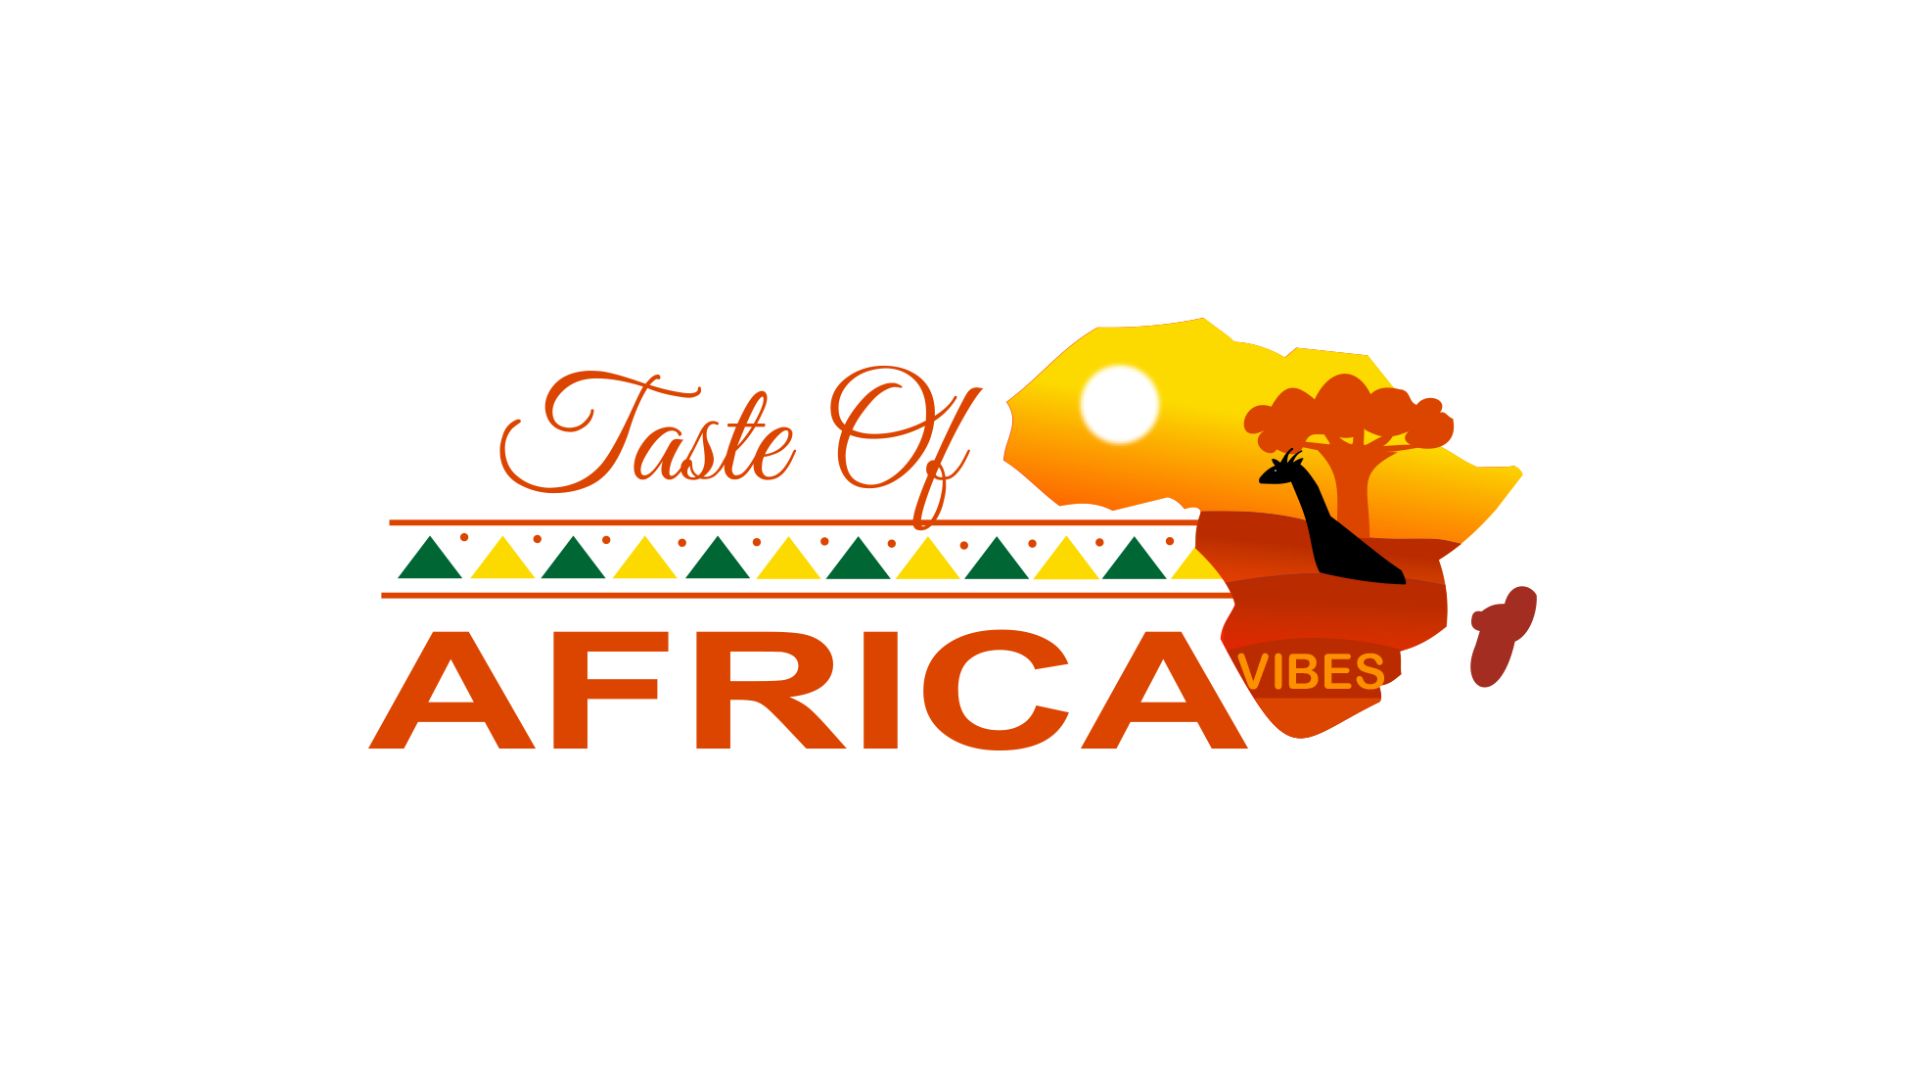 Taste of Africa Vibes to Host 2nd Africa Travel Content Creators Conference in Cape Town